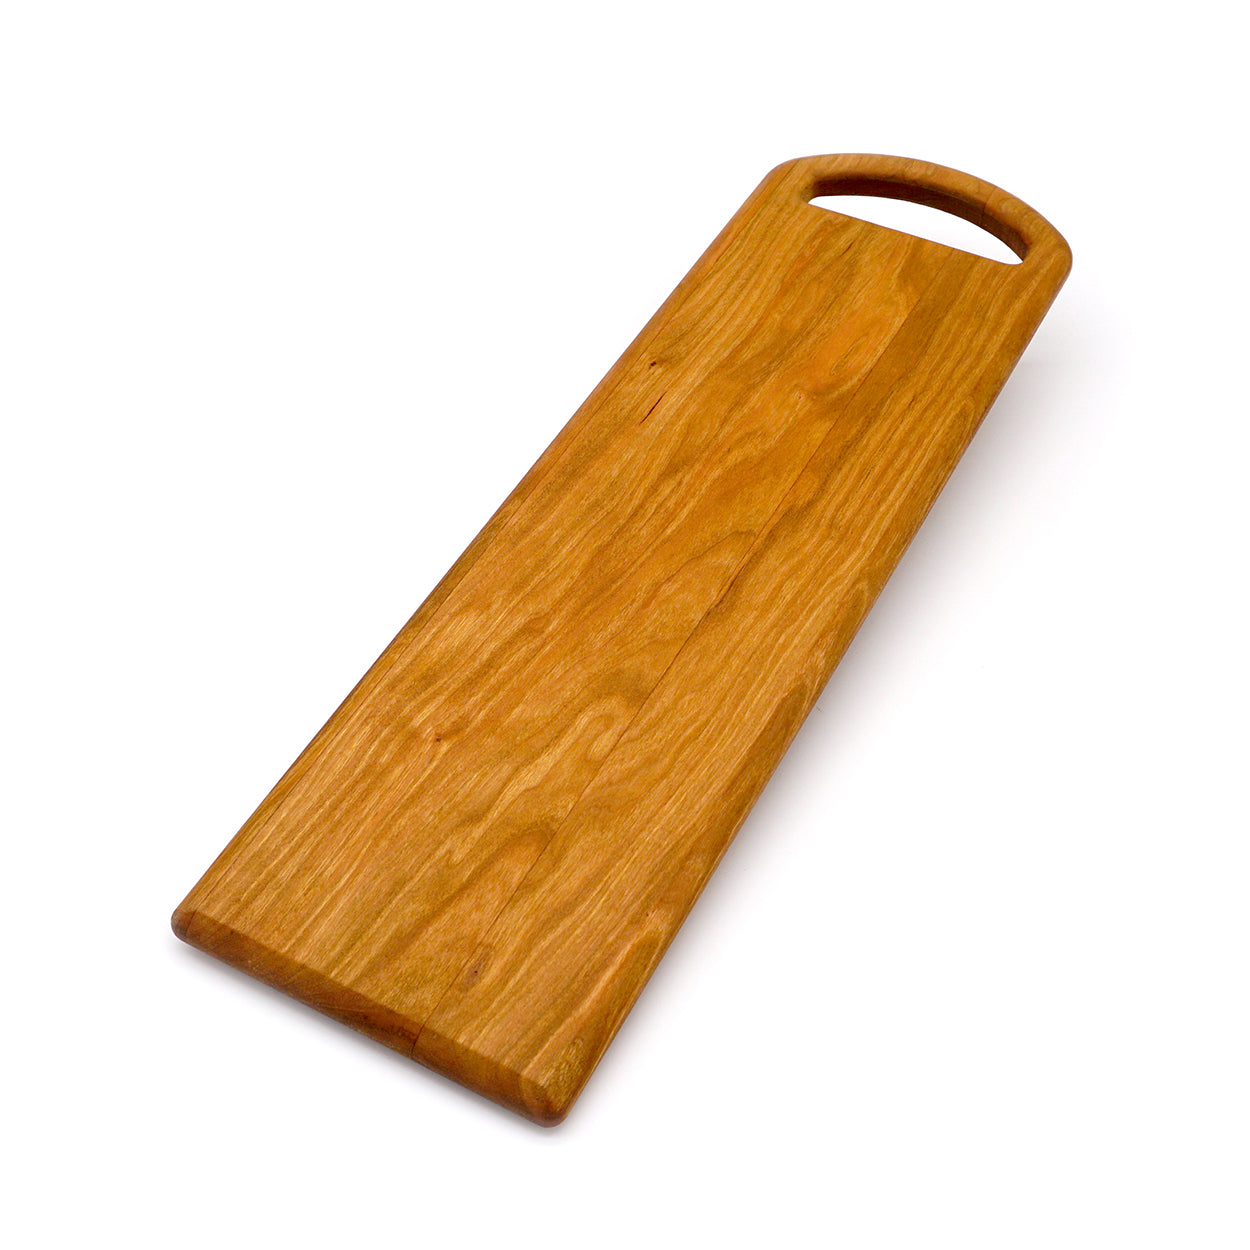 Large cherry wood serving board with oval handle - Terrestra